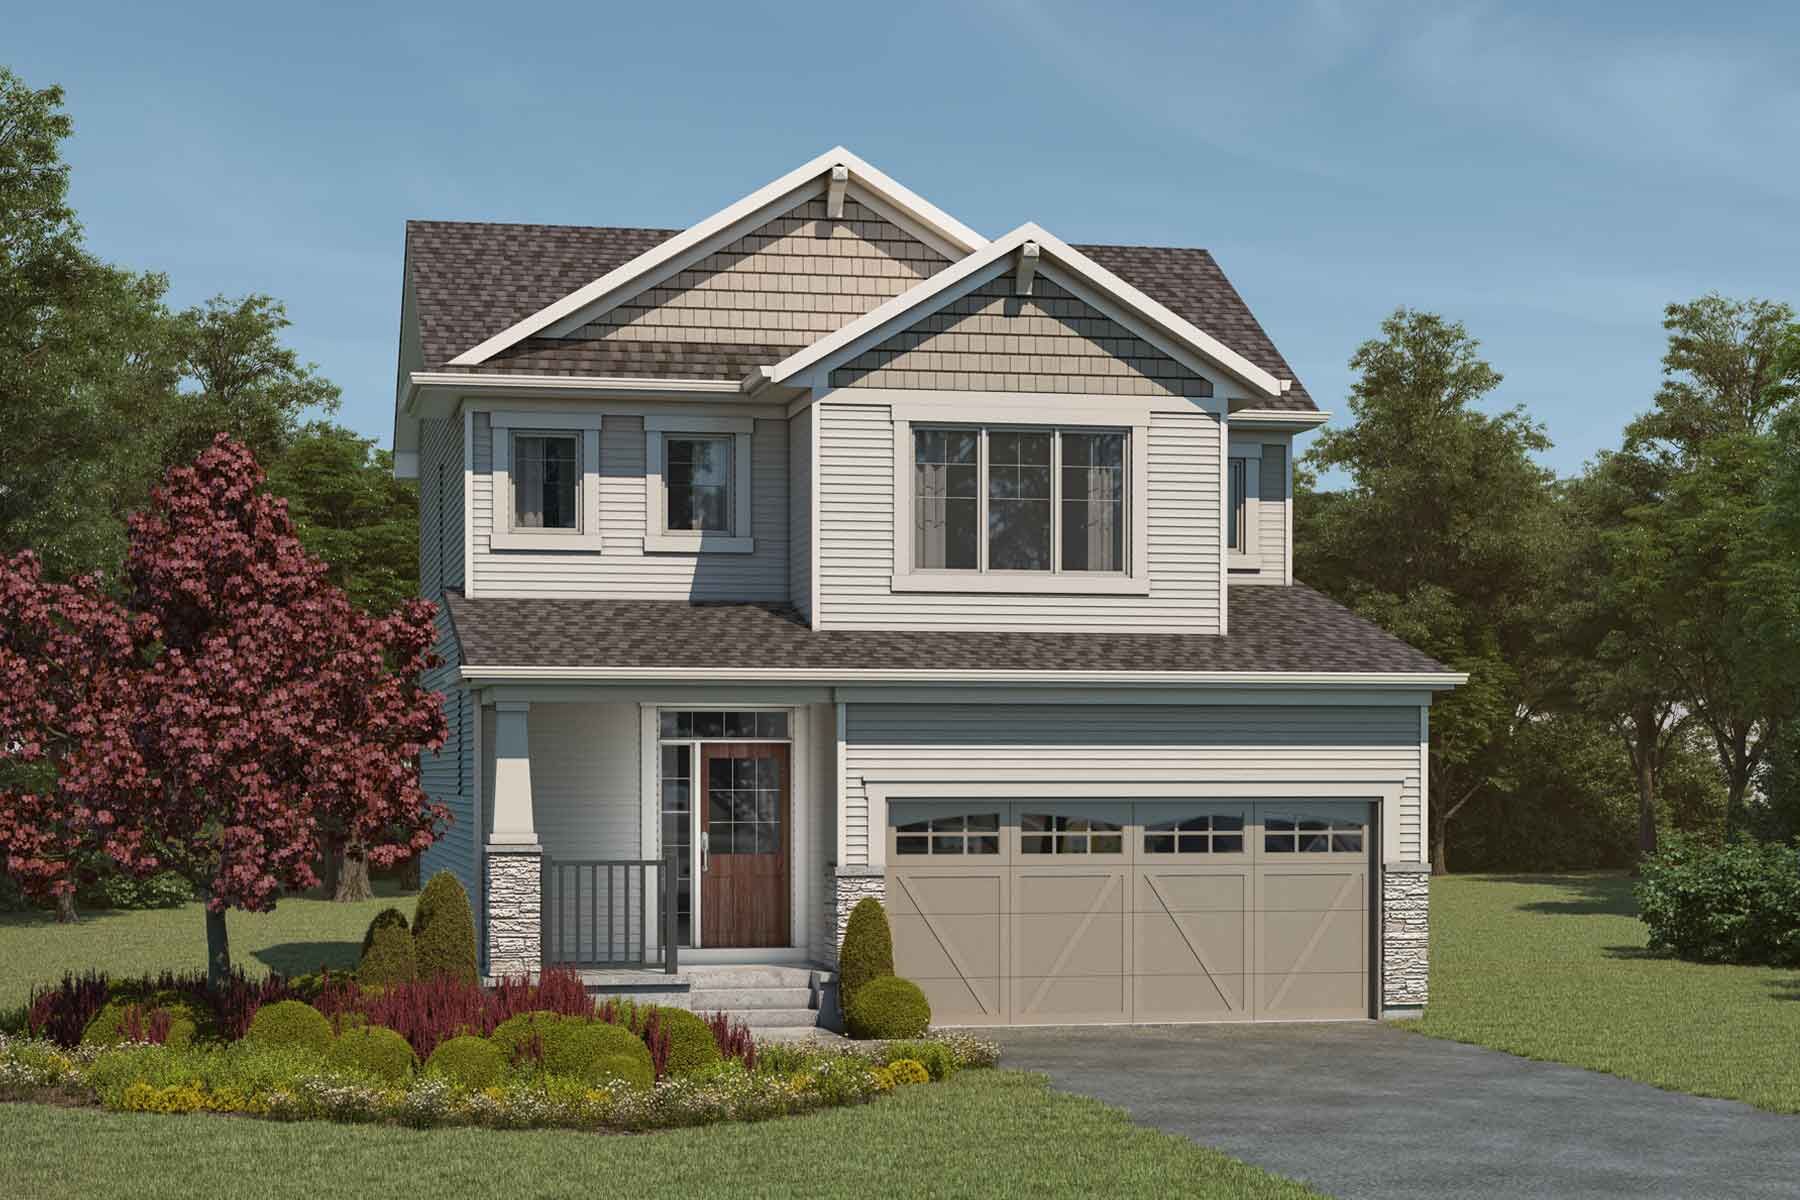 A Craftsman style single family home with a double car garage.